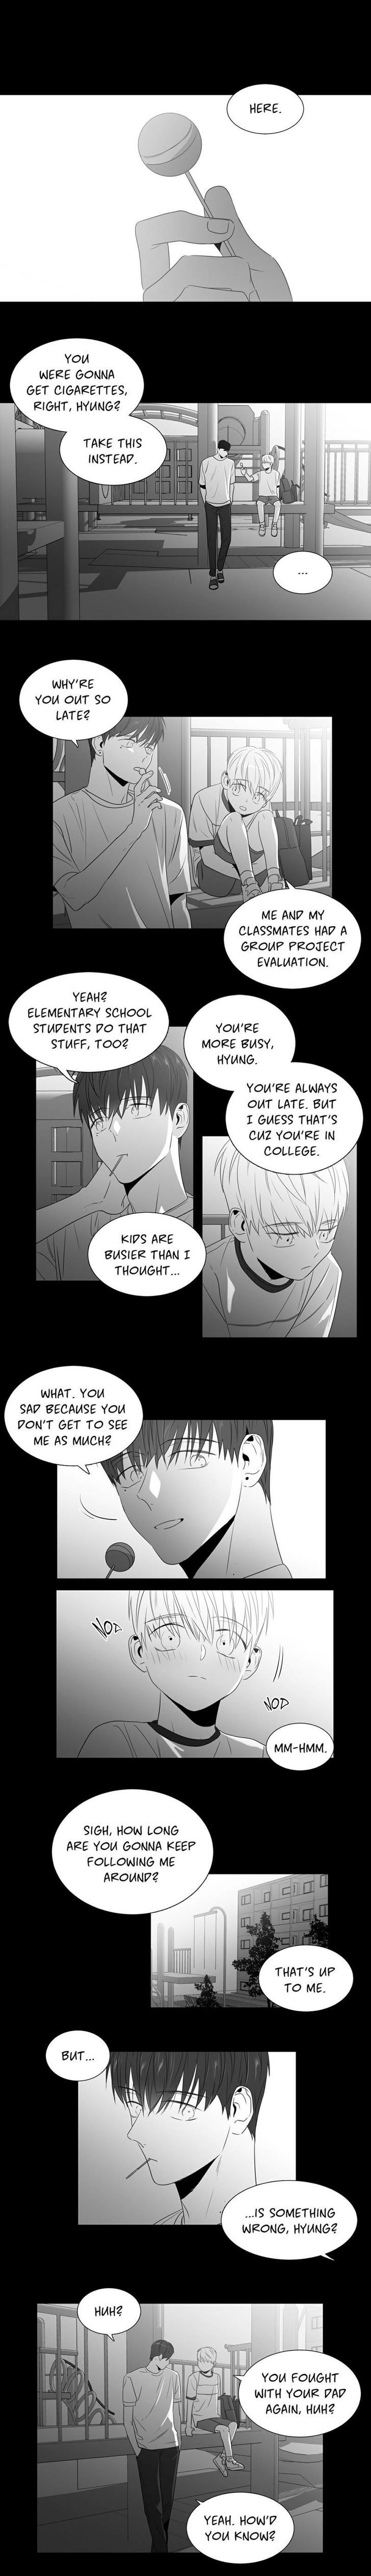 Lover Boy (Lezhin) Chapter 047.2 page 2